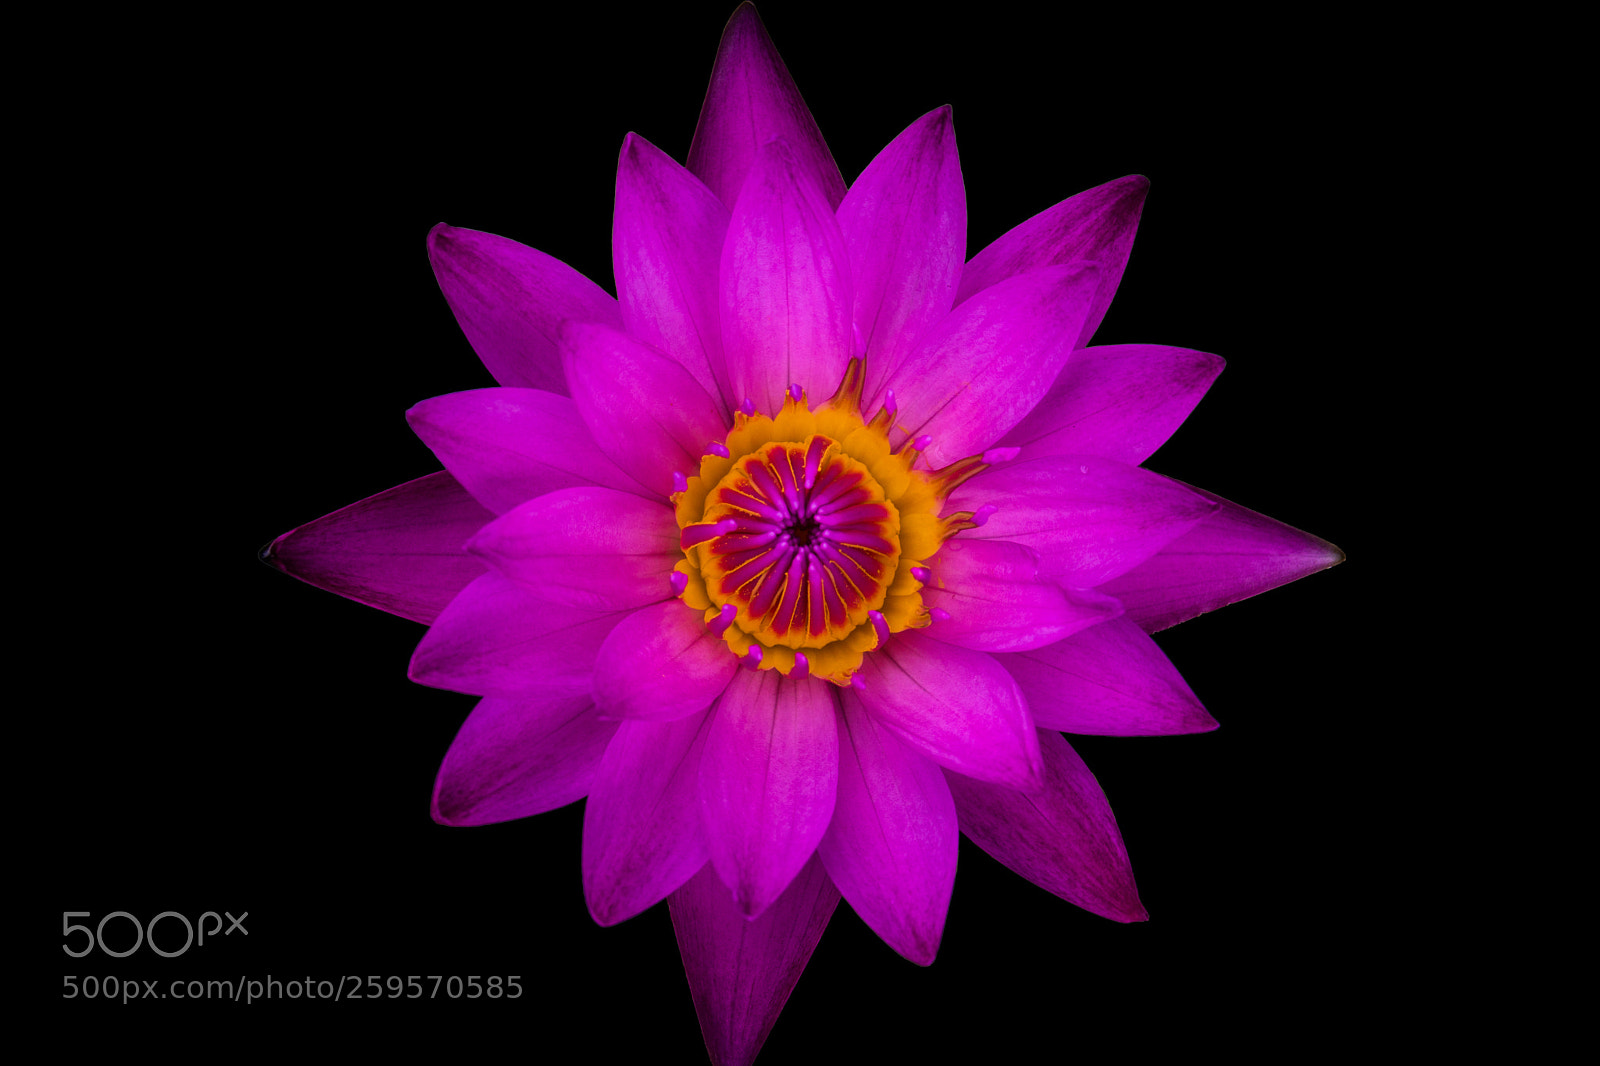 Sony a6300 sample photo. Top view purple lotus photography